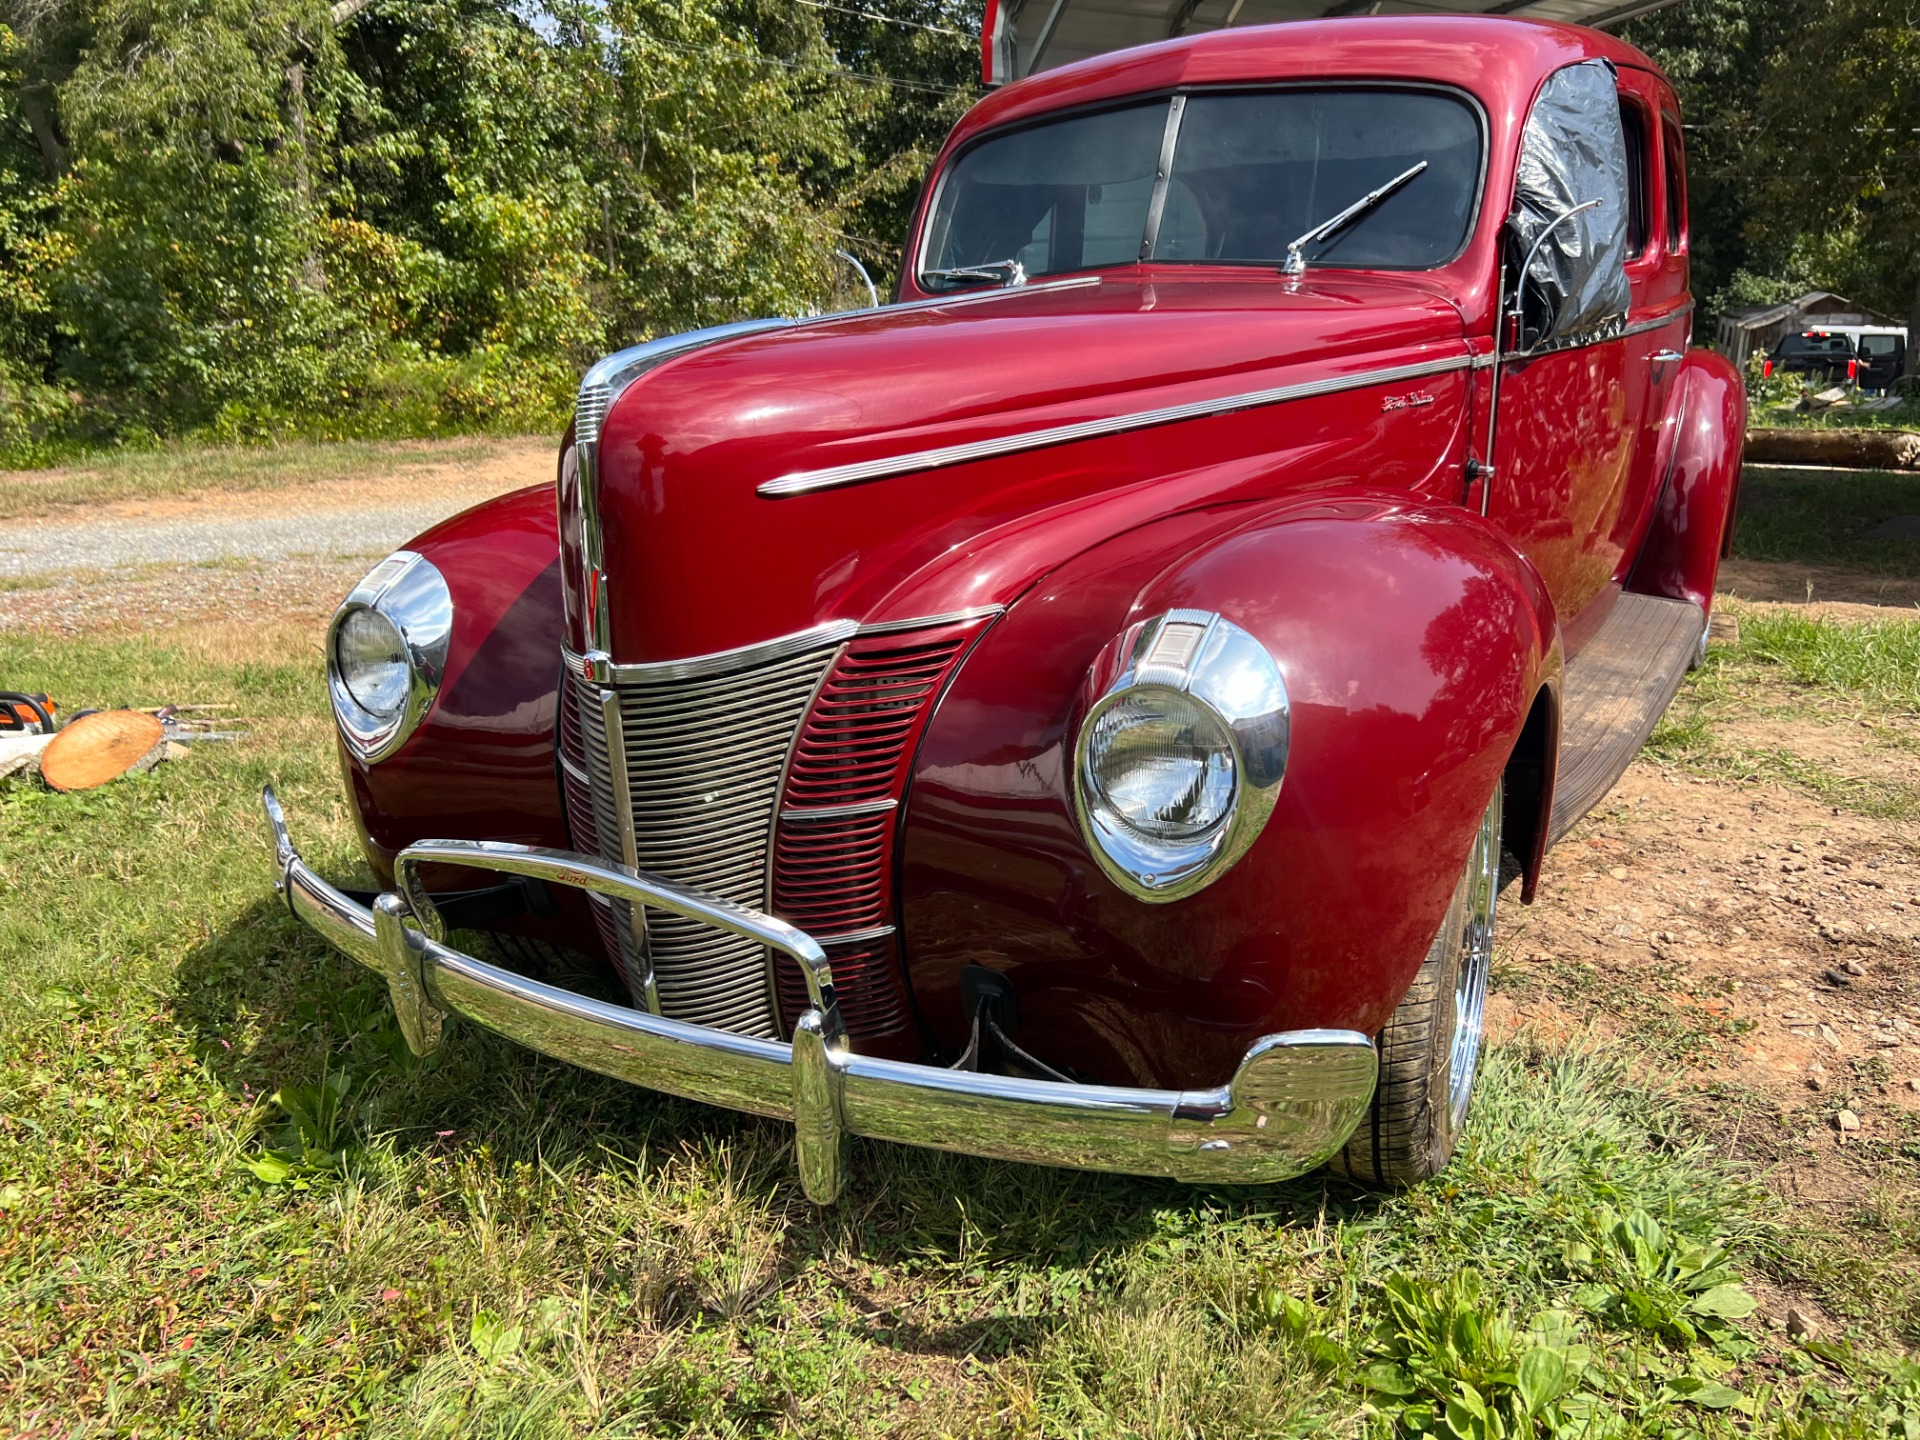 Used 1940 Ford Deluxe Coupe  256 , For Sale $21000, Call Us: (704) 996-3735